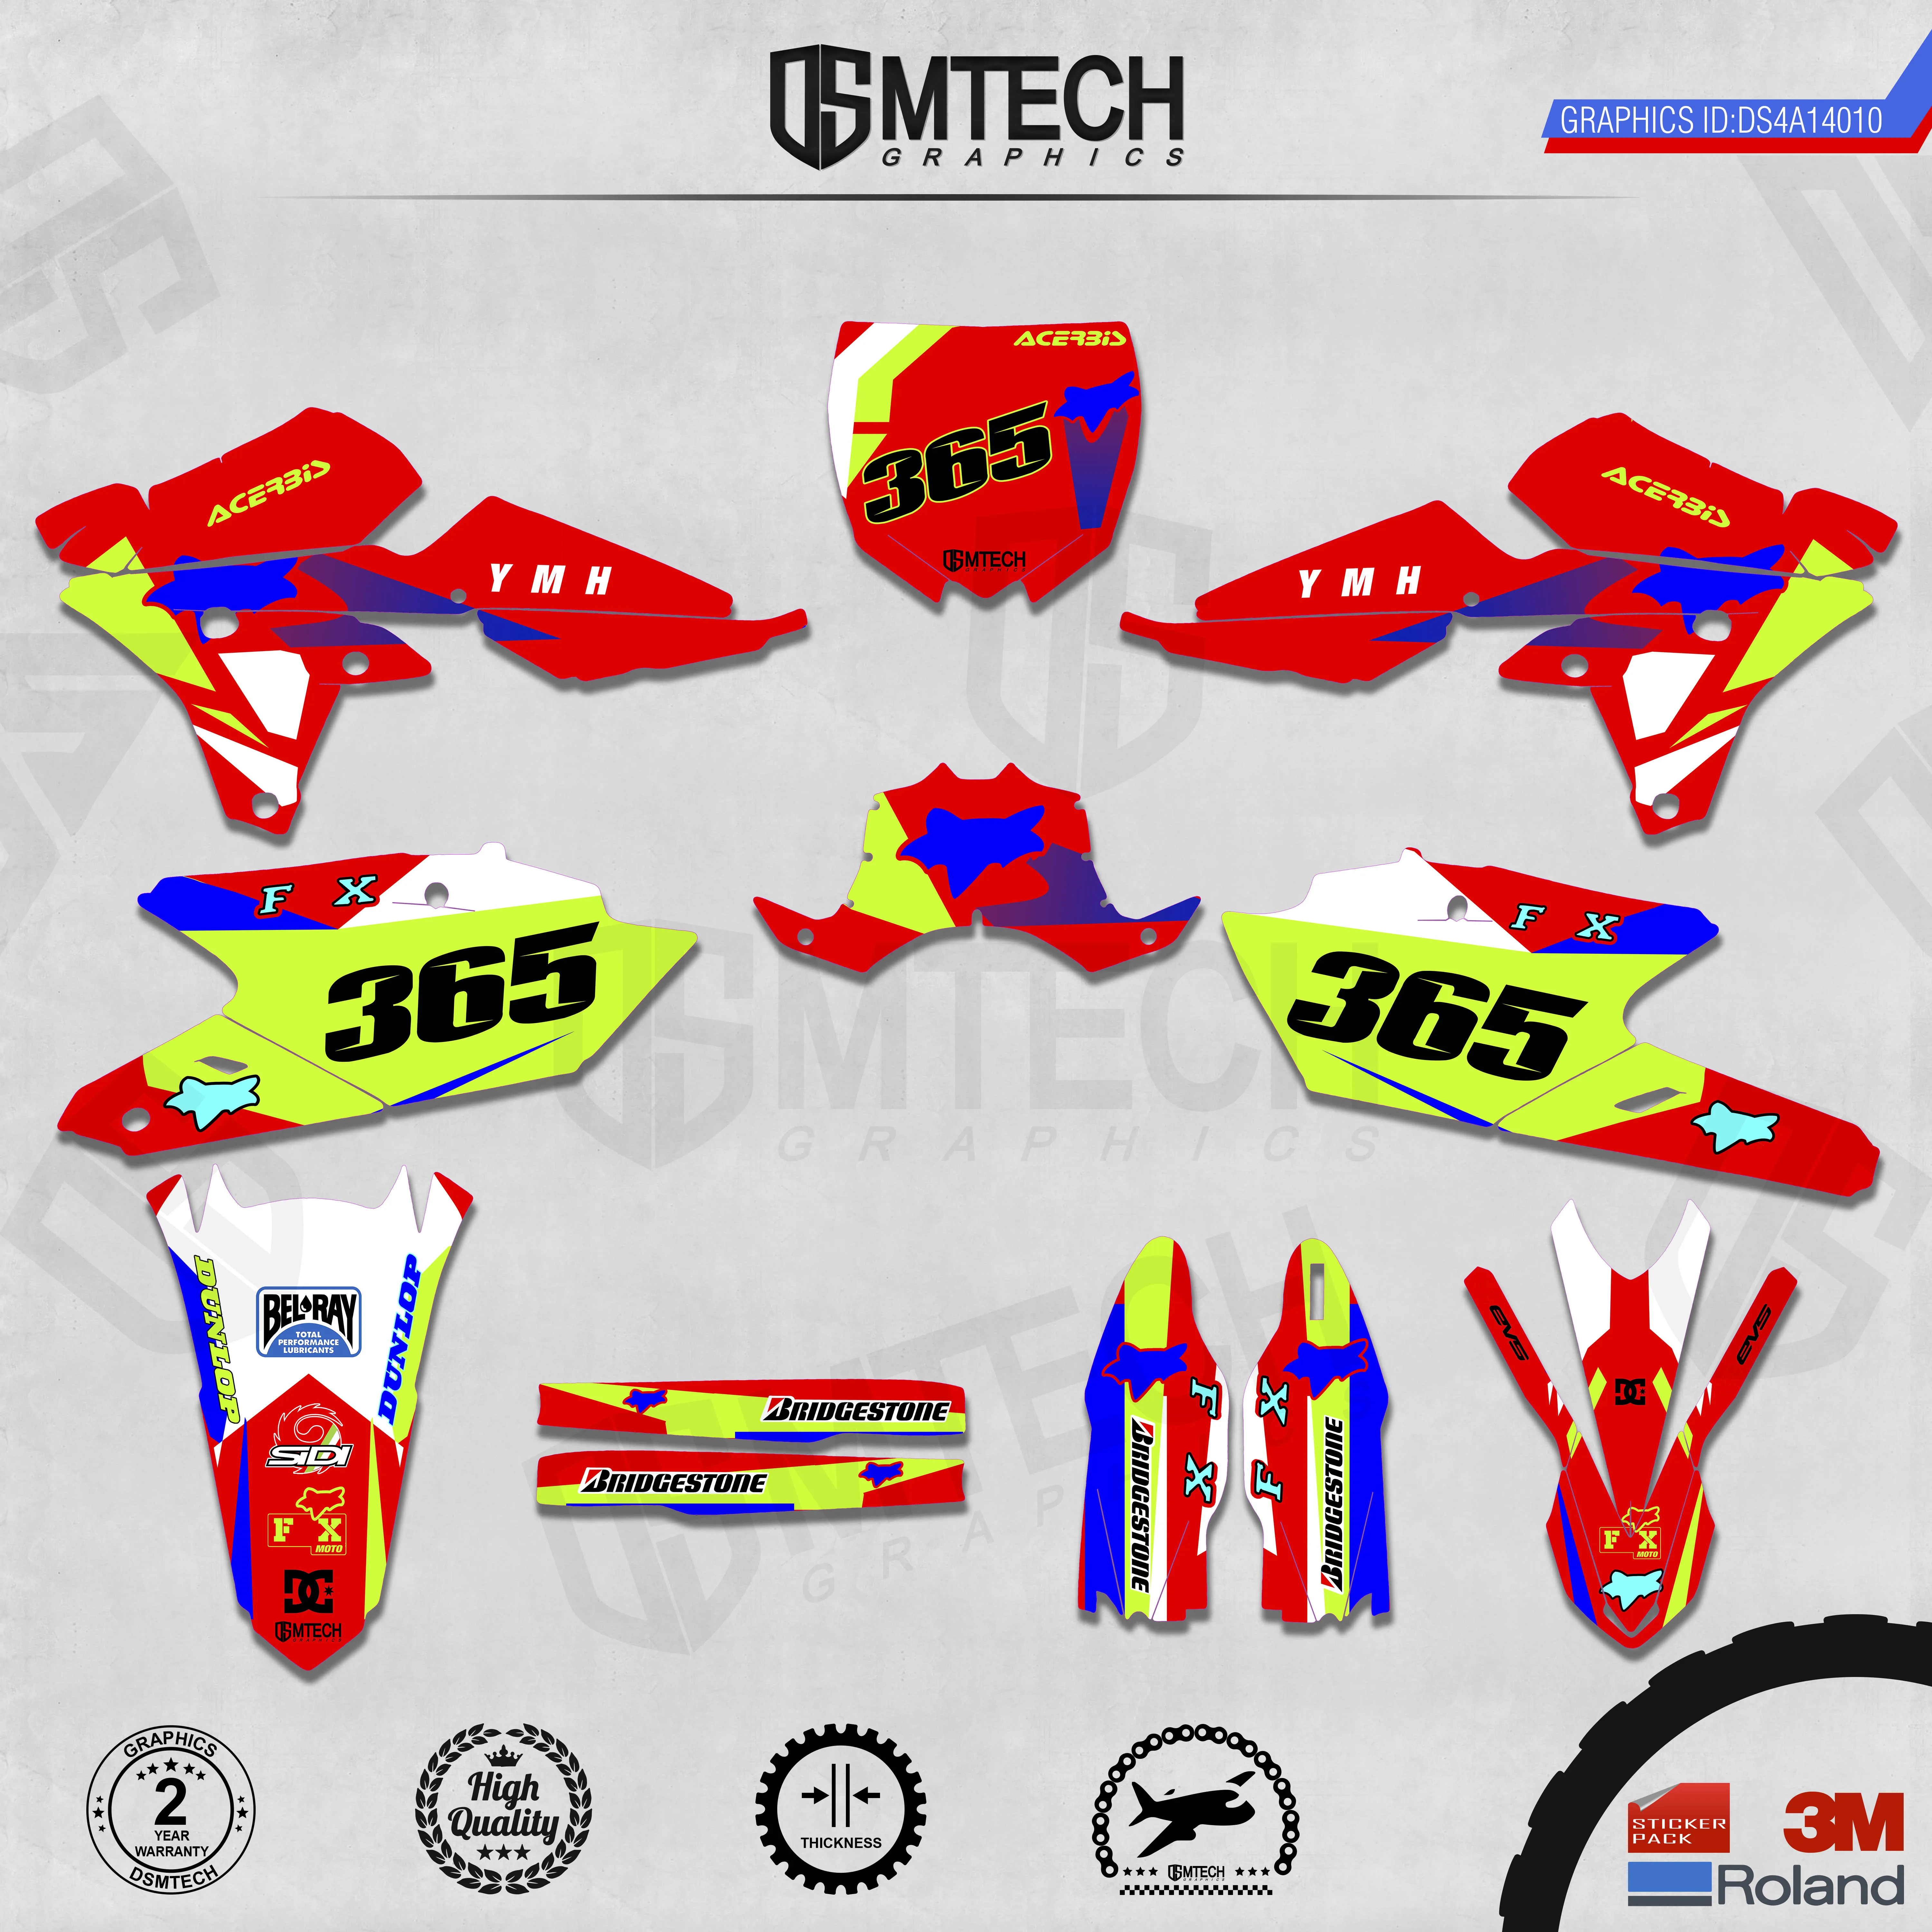 dsmtech-customized-team-graphics-backgrounds-decals-3m-custom-stickers-for-14-18-yz250f-15-19-yz250fx-wrf250-14-17-yz450f-010